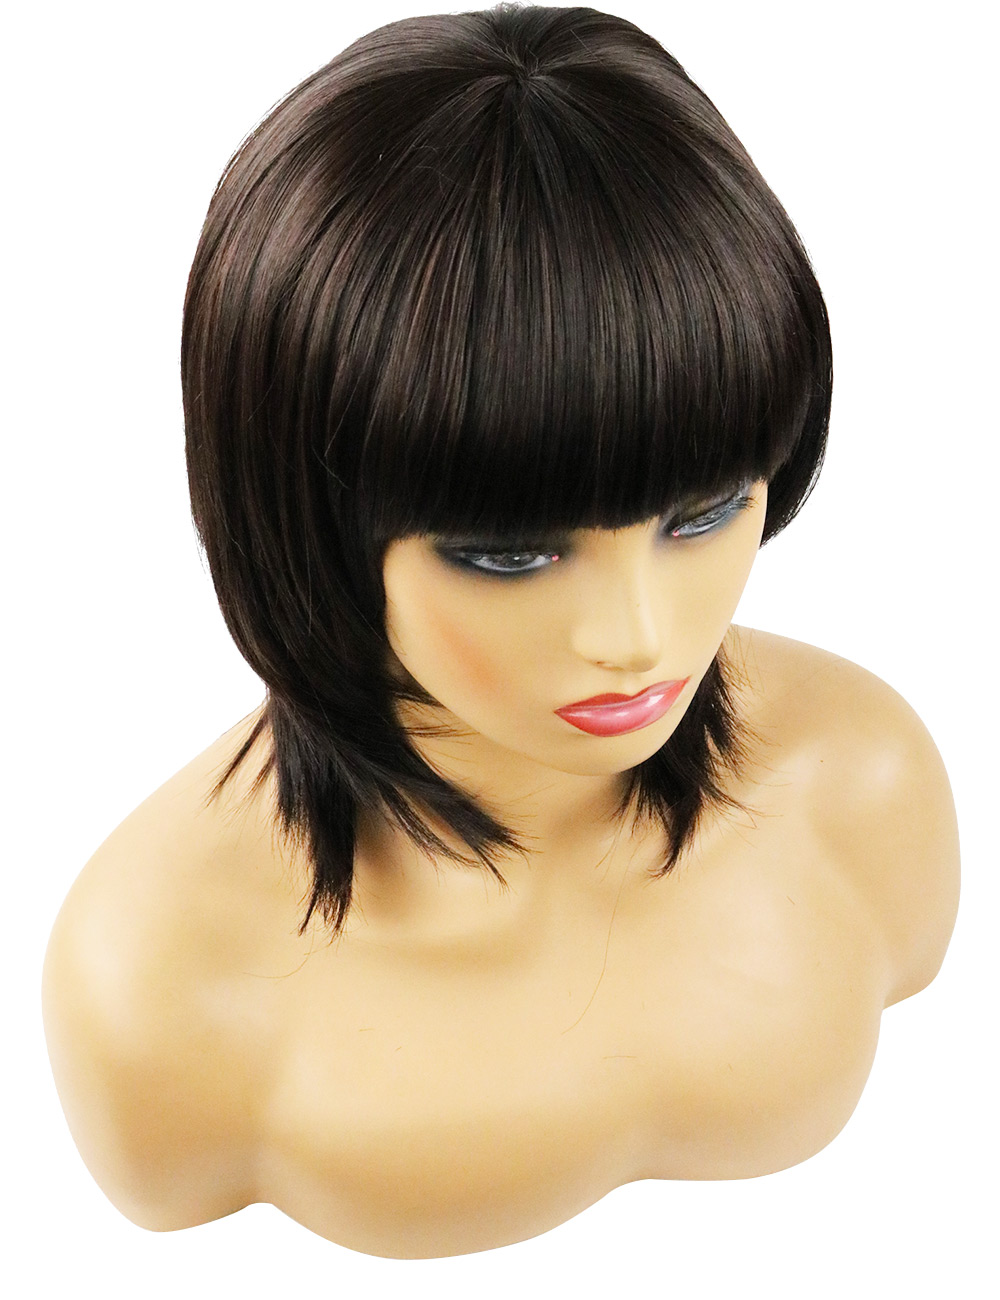 Straight Synthetic Hair Capless 120% 12 Inches Wigs With Full Fringe